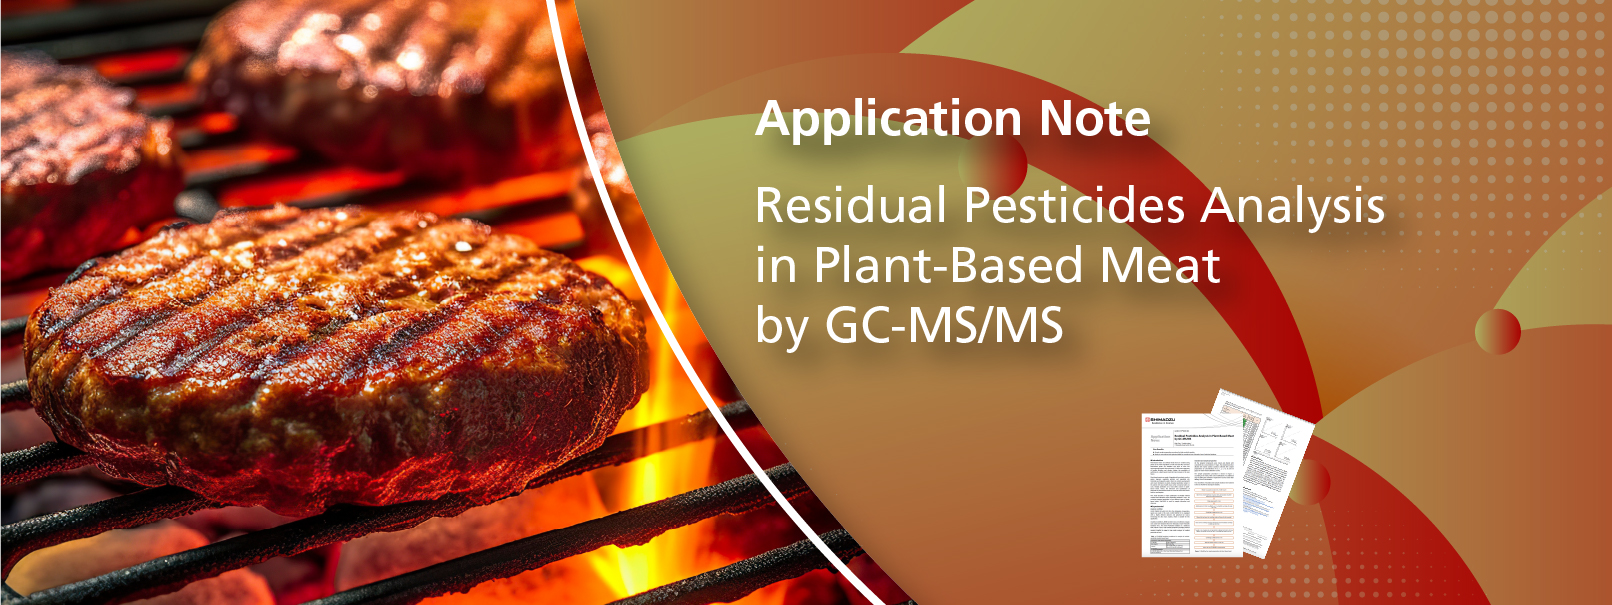 Residual Pesticides Analysis in Plant-Based Meat by GC-MS/MS